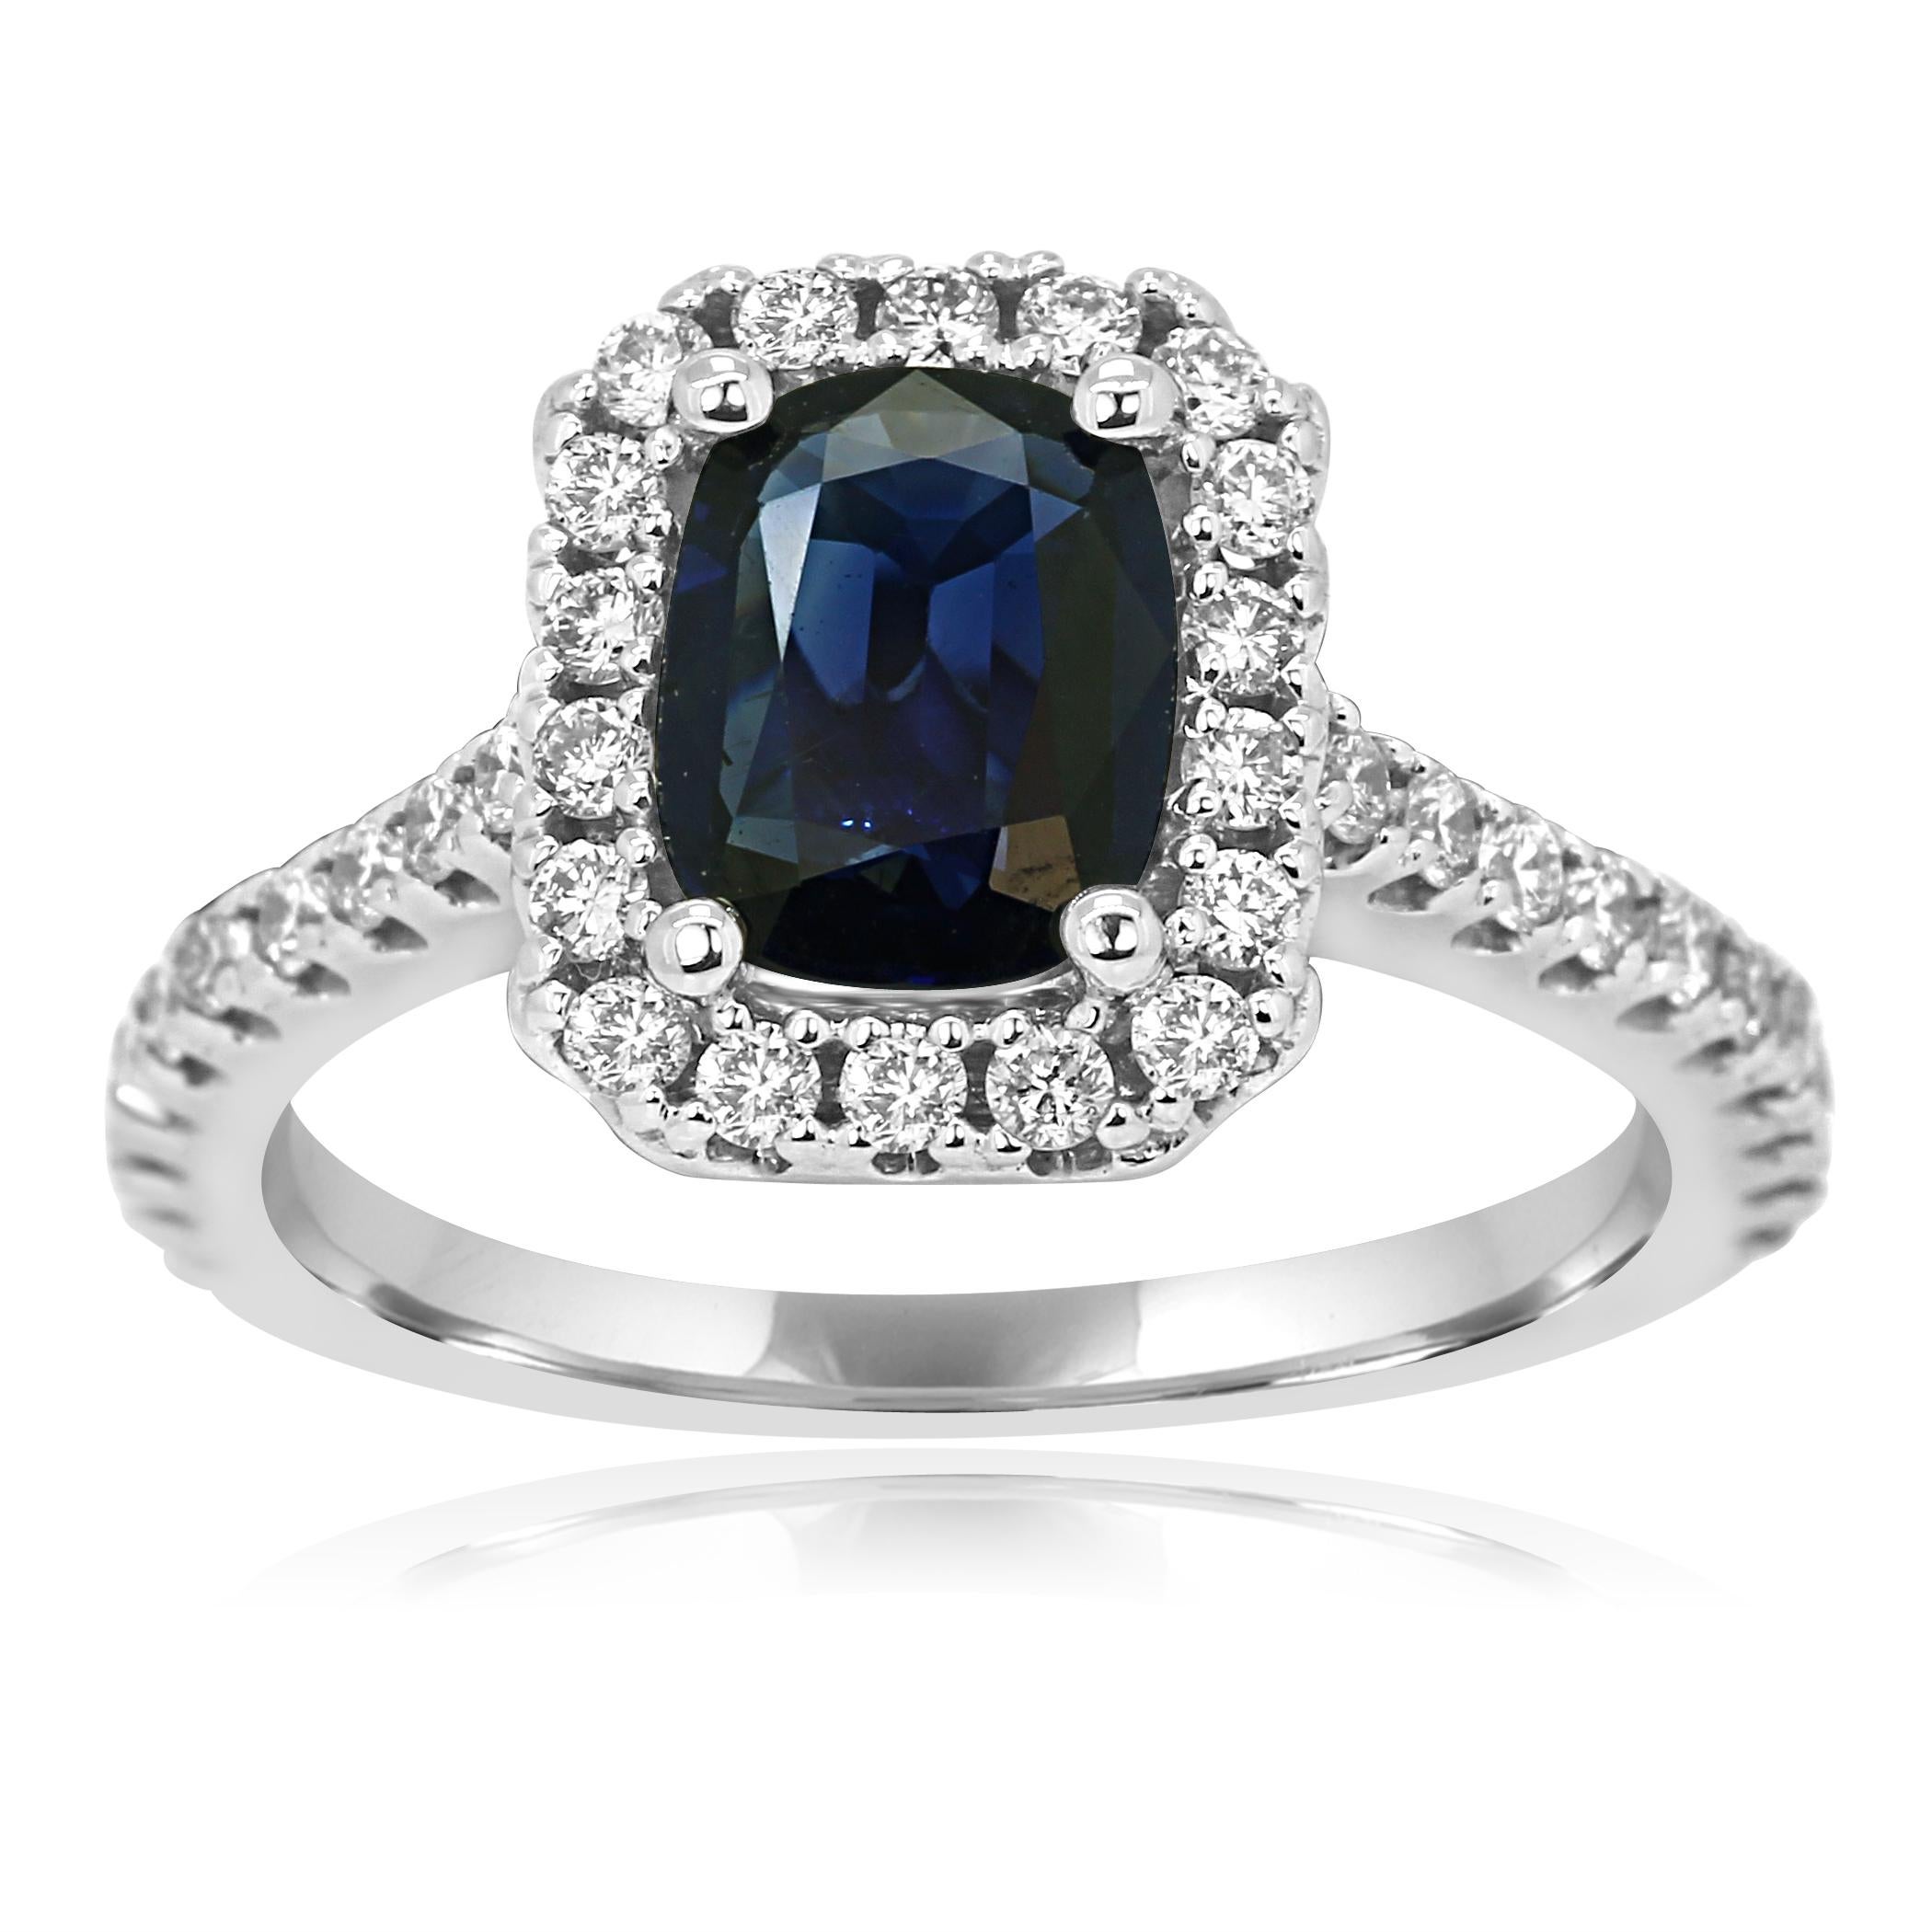 Blue Sapphire Cushion 1.27 Carat encircled in a single Halo of White Round Diamond 0.50 Carat Set in Classic 14K White Gold Bridal Cocktail Ring.
MADE IN USA

Style available in different price ranges. Prices are based on your selection of 4C's Cut,